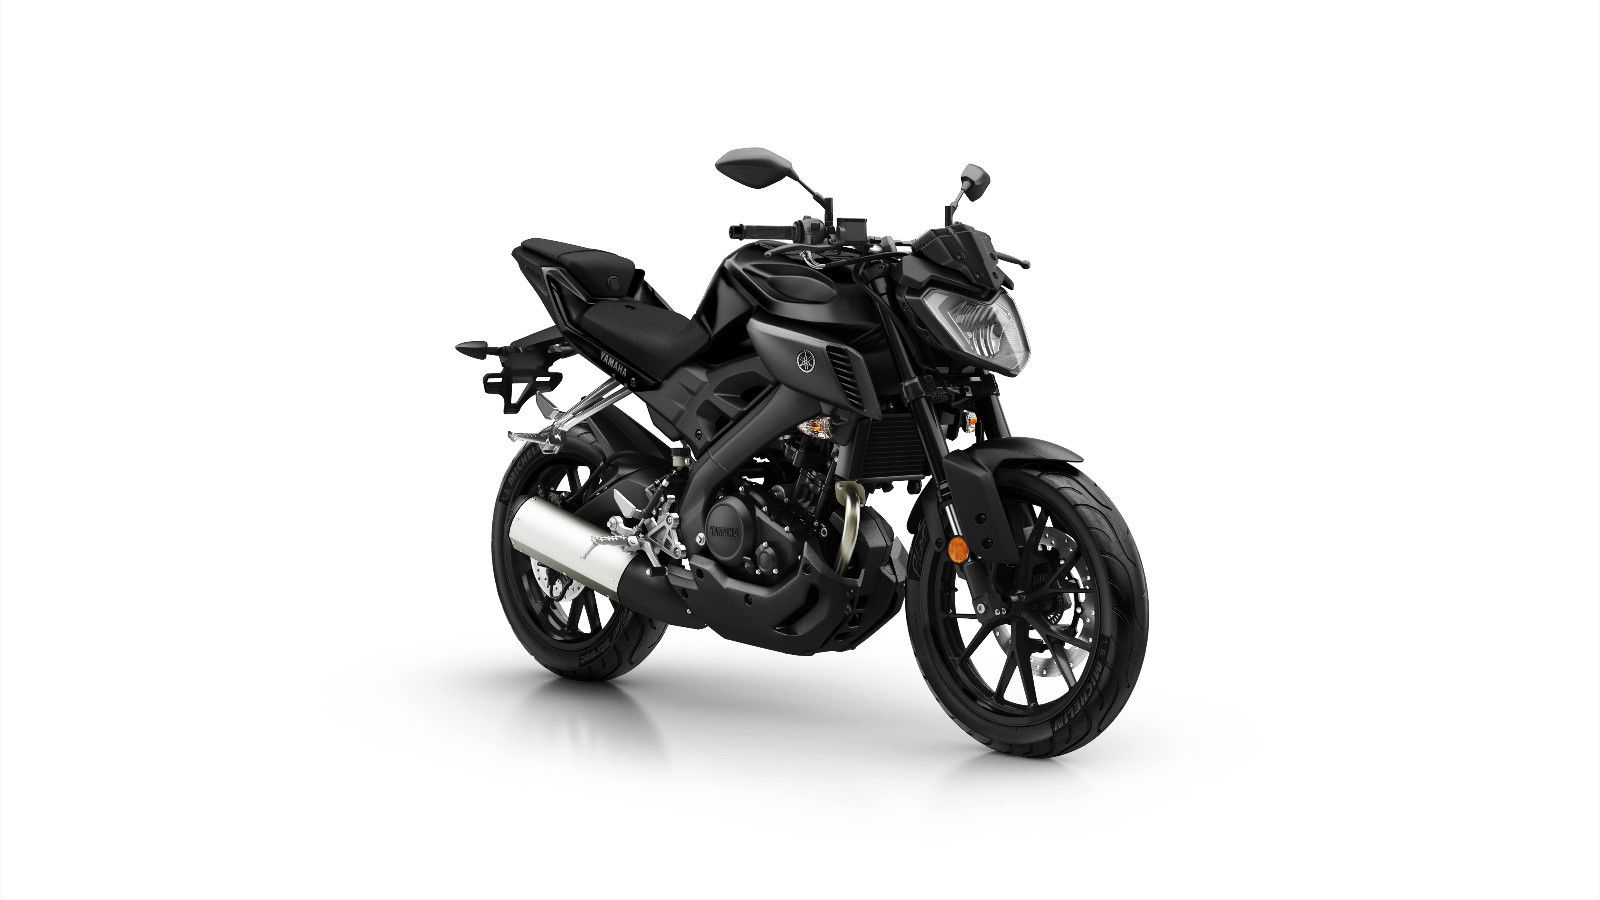 MT-125 ABS Modell 2019 SOFORT LIEFERBAR!